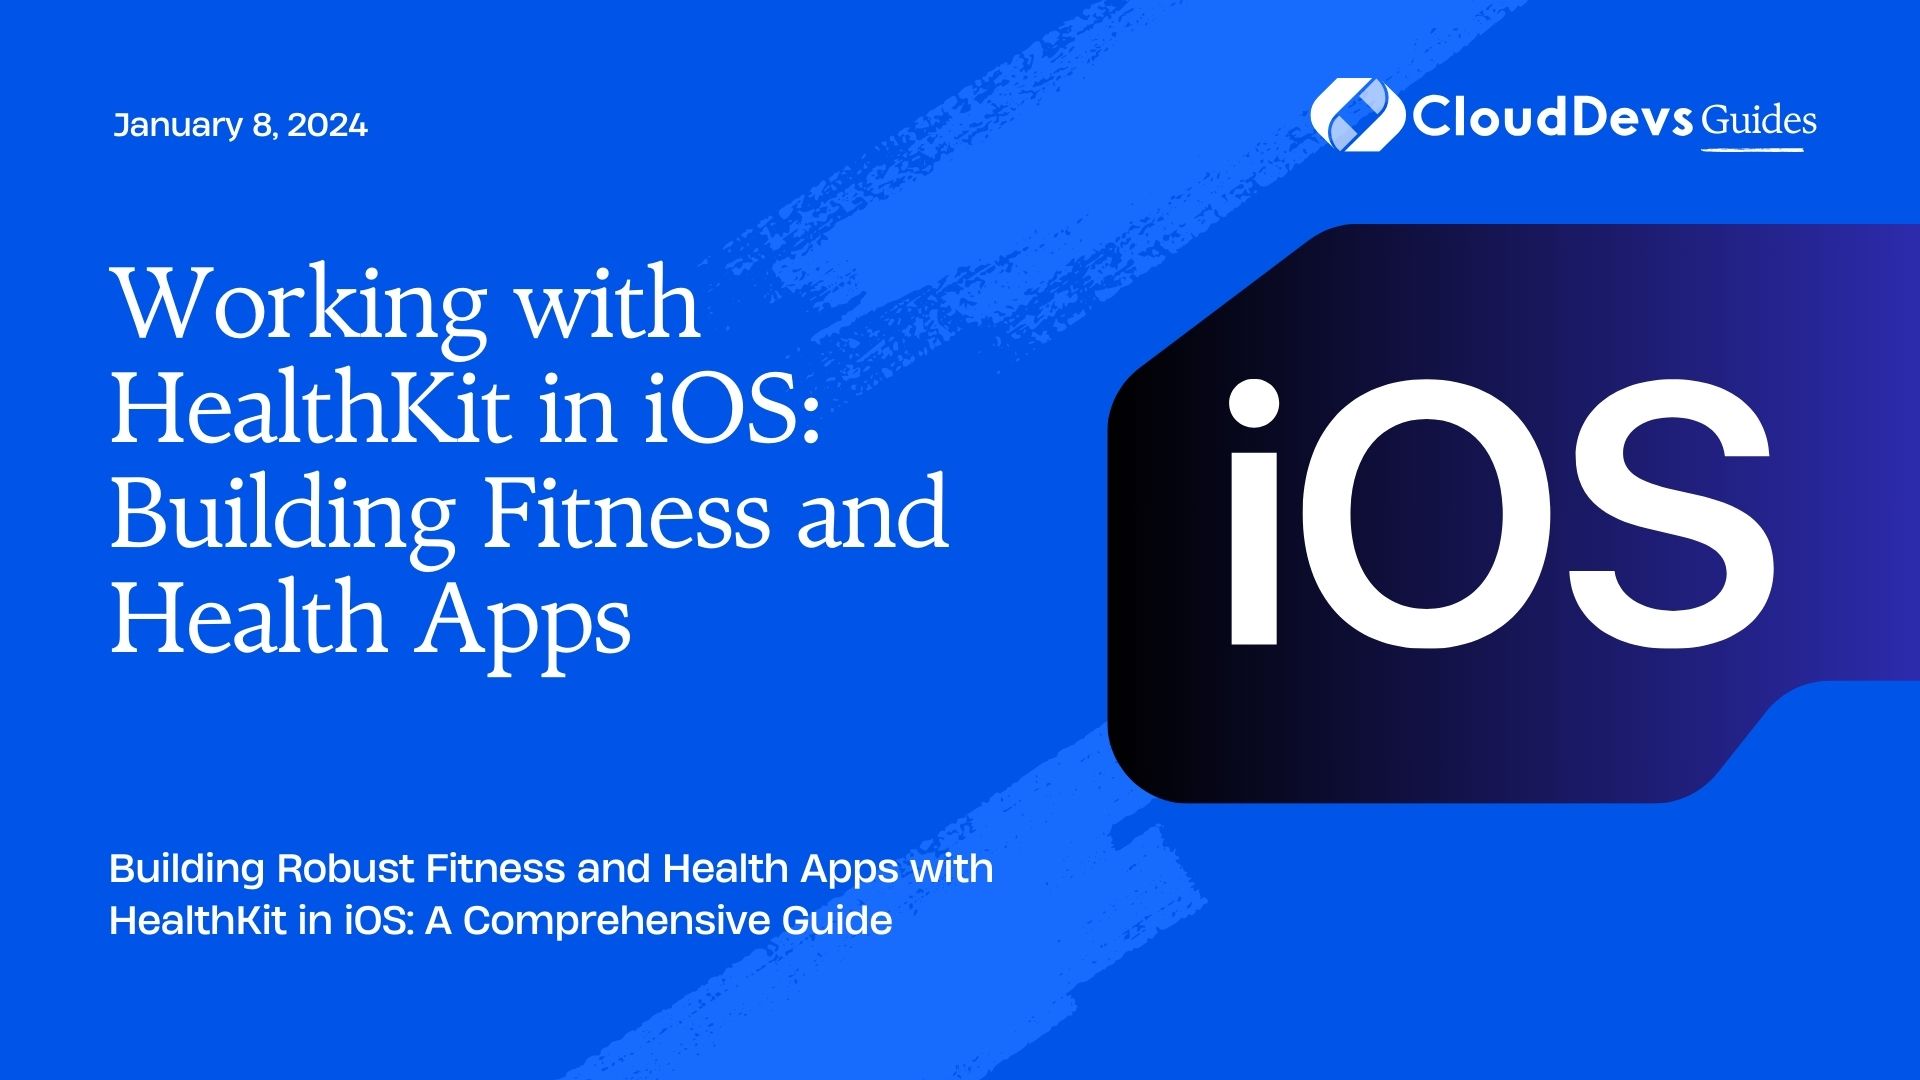 Working with HealthKit in iOS: Building Fitness and Health Apps